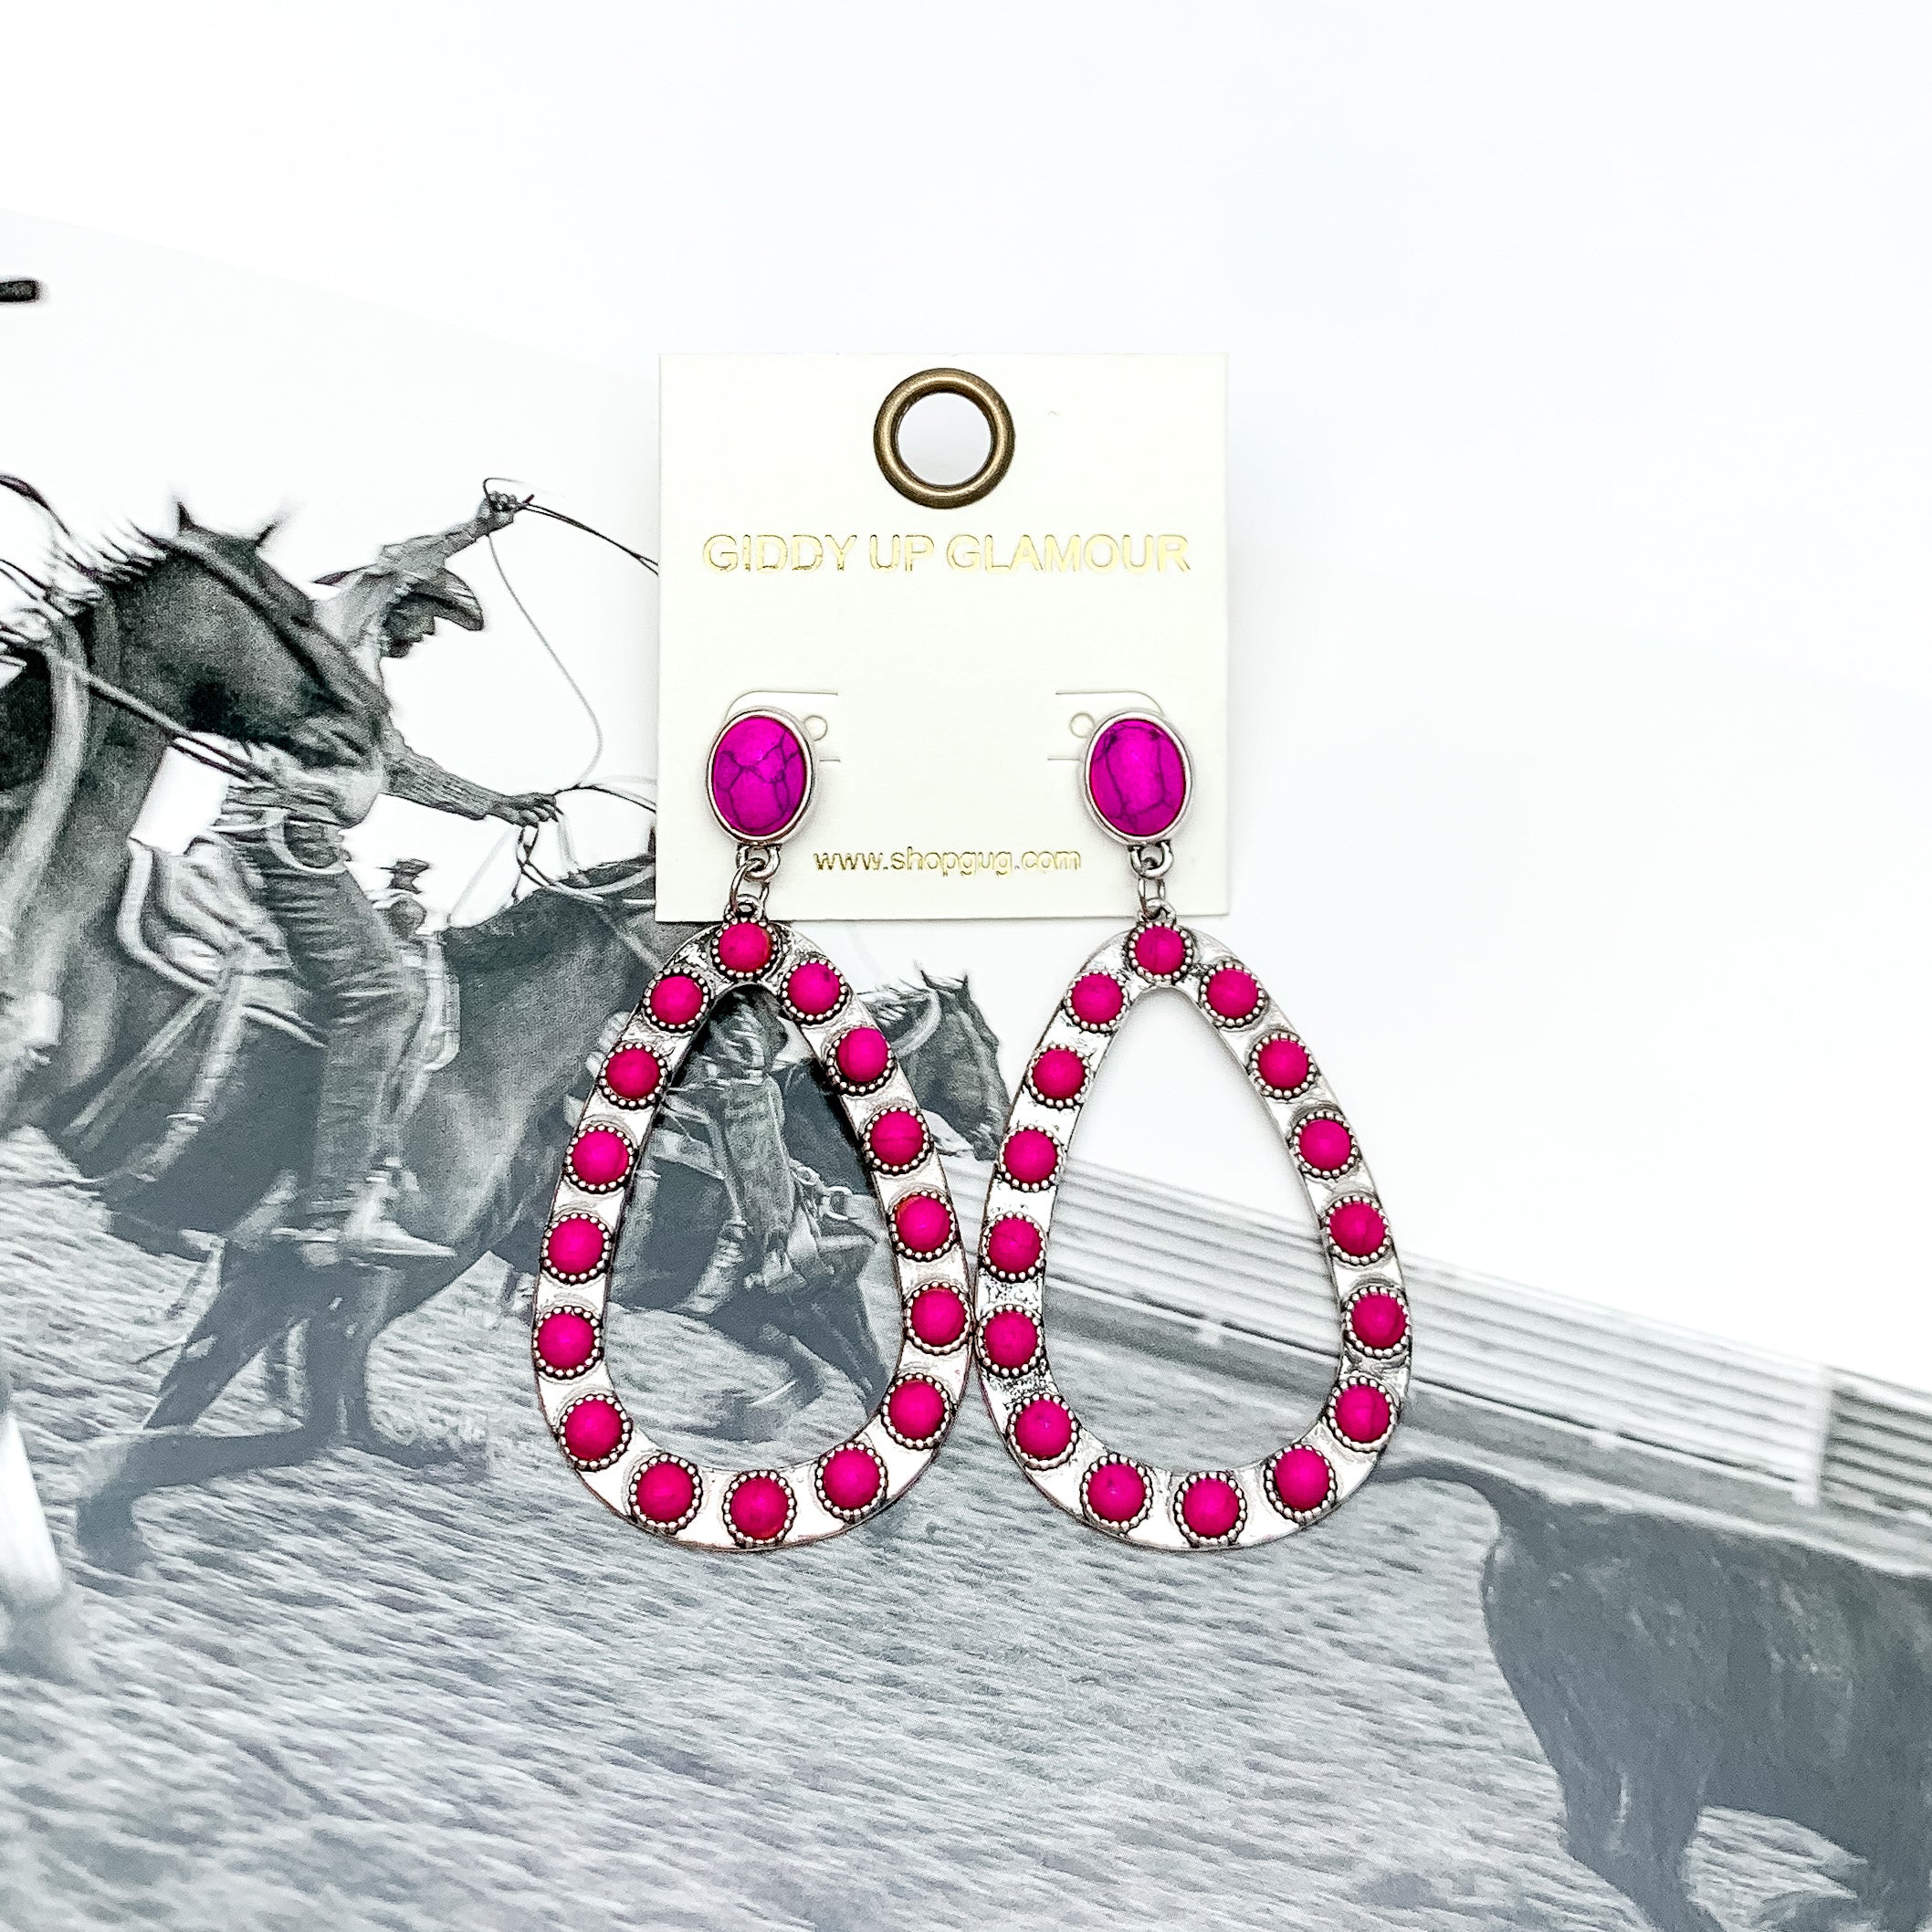 Western Open Teardrop Earrings With Stones in Hot Pink. Pictured on a western background picture.